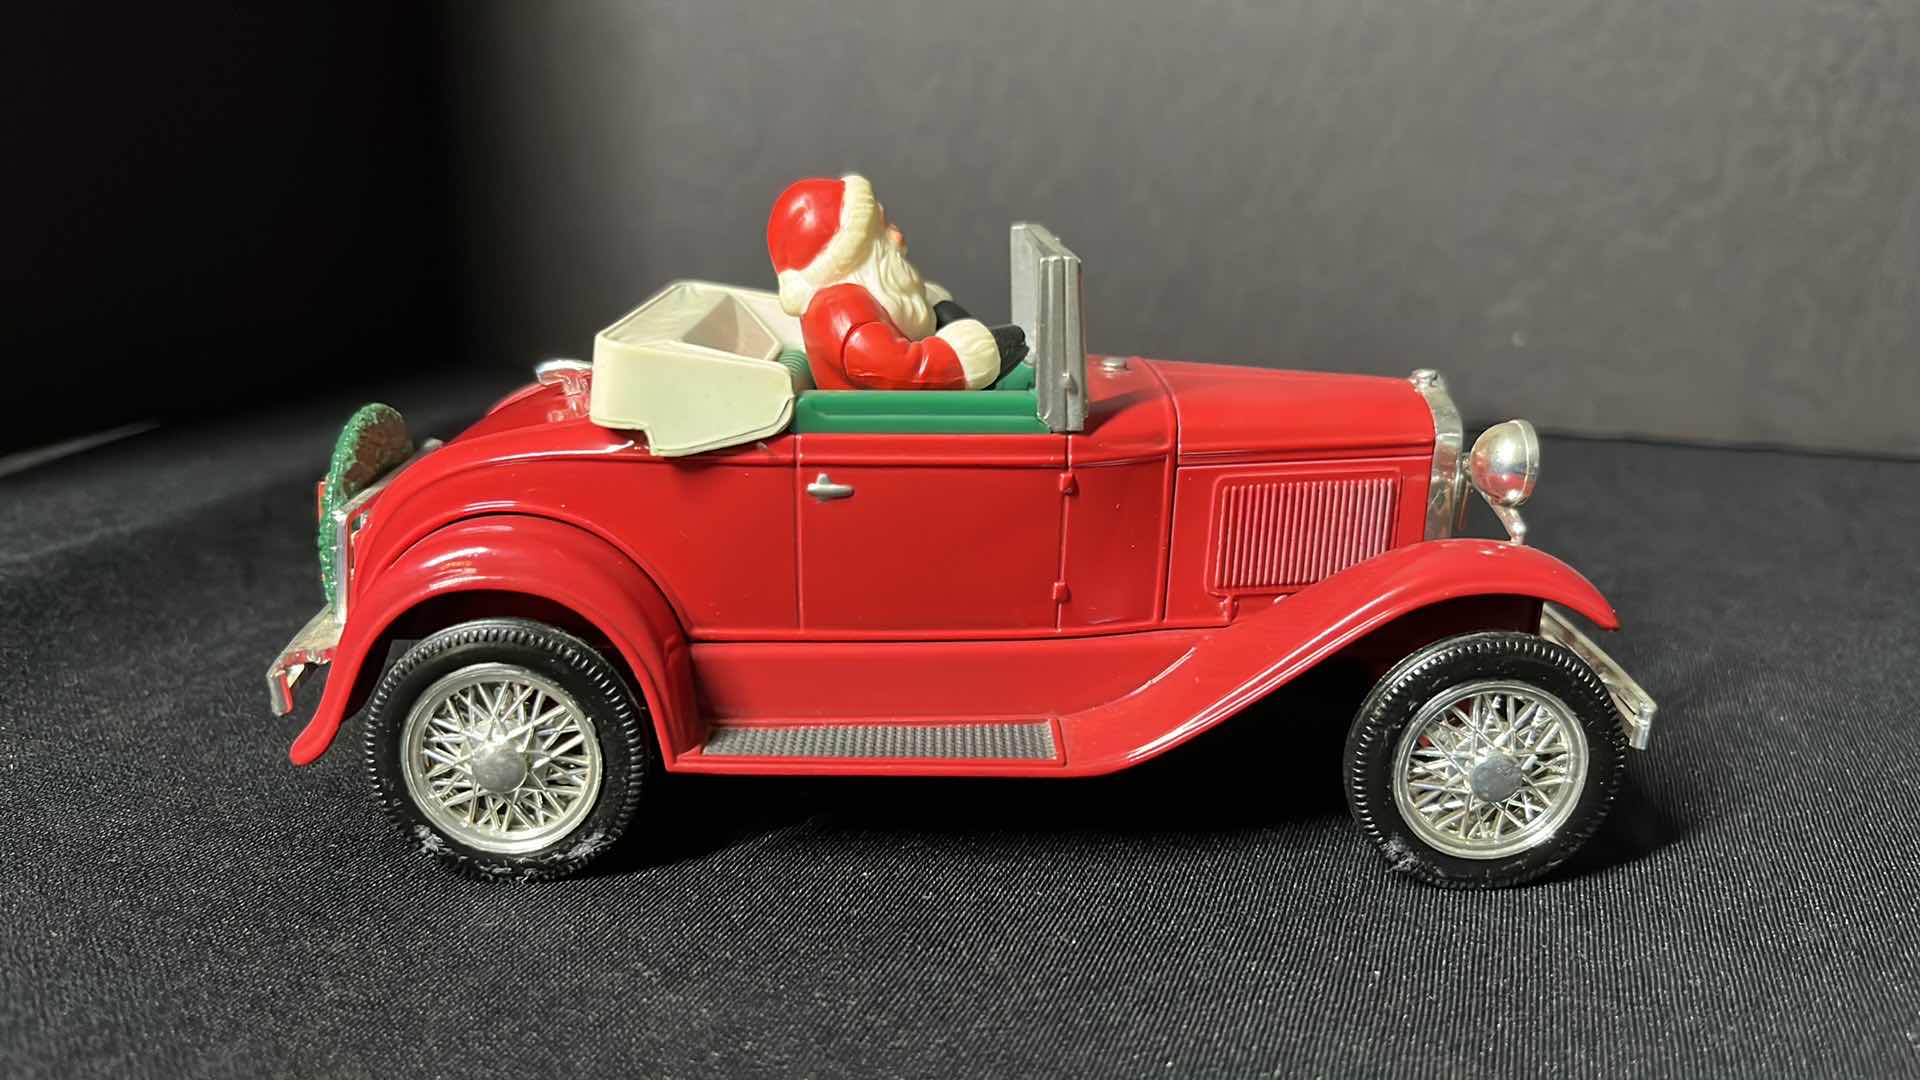 Photo 3 of THE EASTWOOD COMPANY DIE-CAST METAL GORD MODEL A 1992 SANTA’S ROADSTER LOCKING COIN BANK W KEY (STOCK #1928)